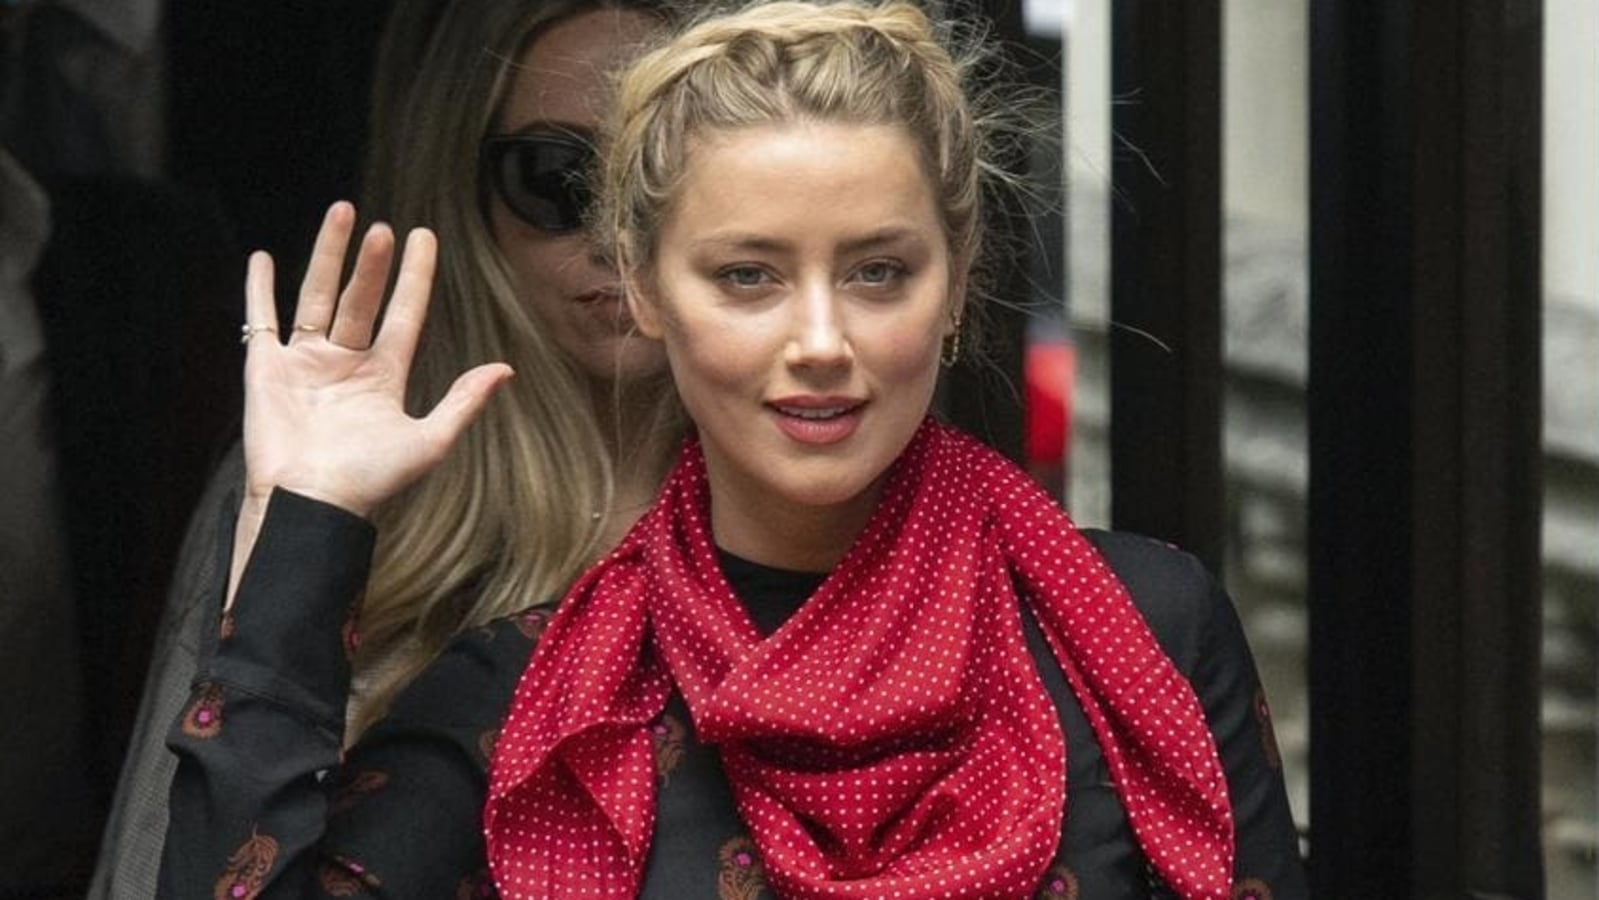 Read more about the article Amber Heard has ‘world’s most beautiful face’ according to science, says report